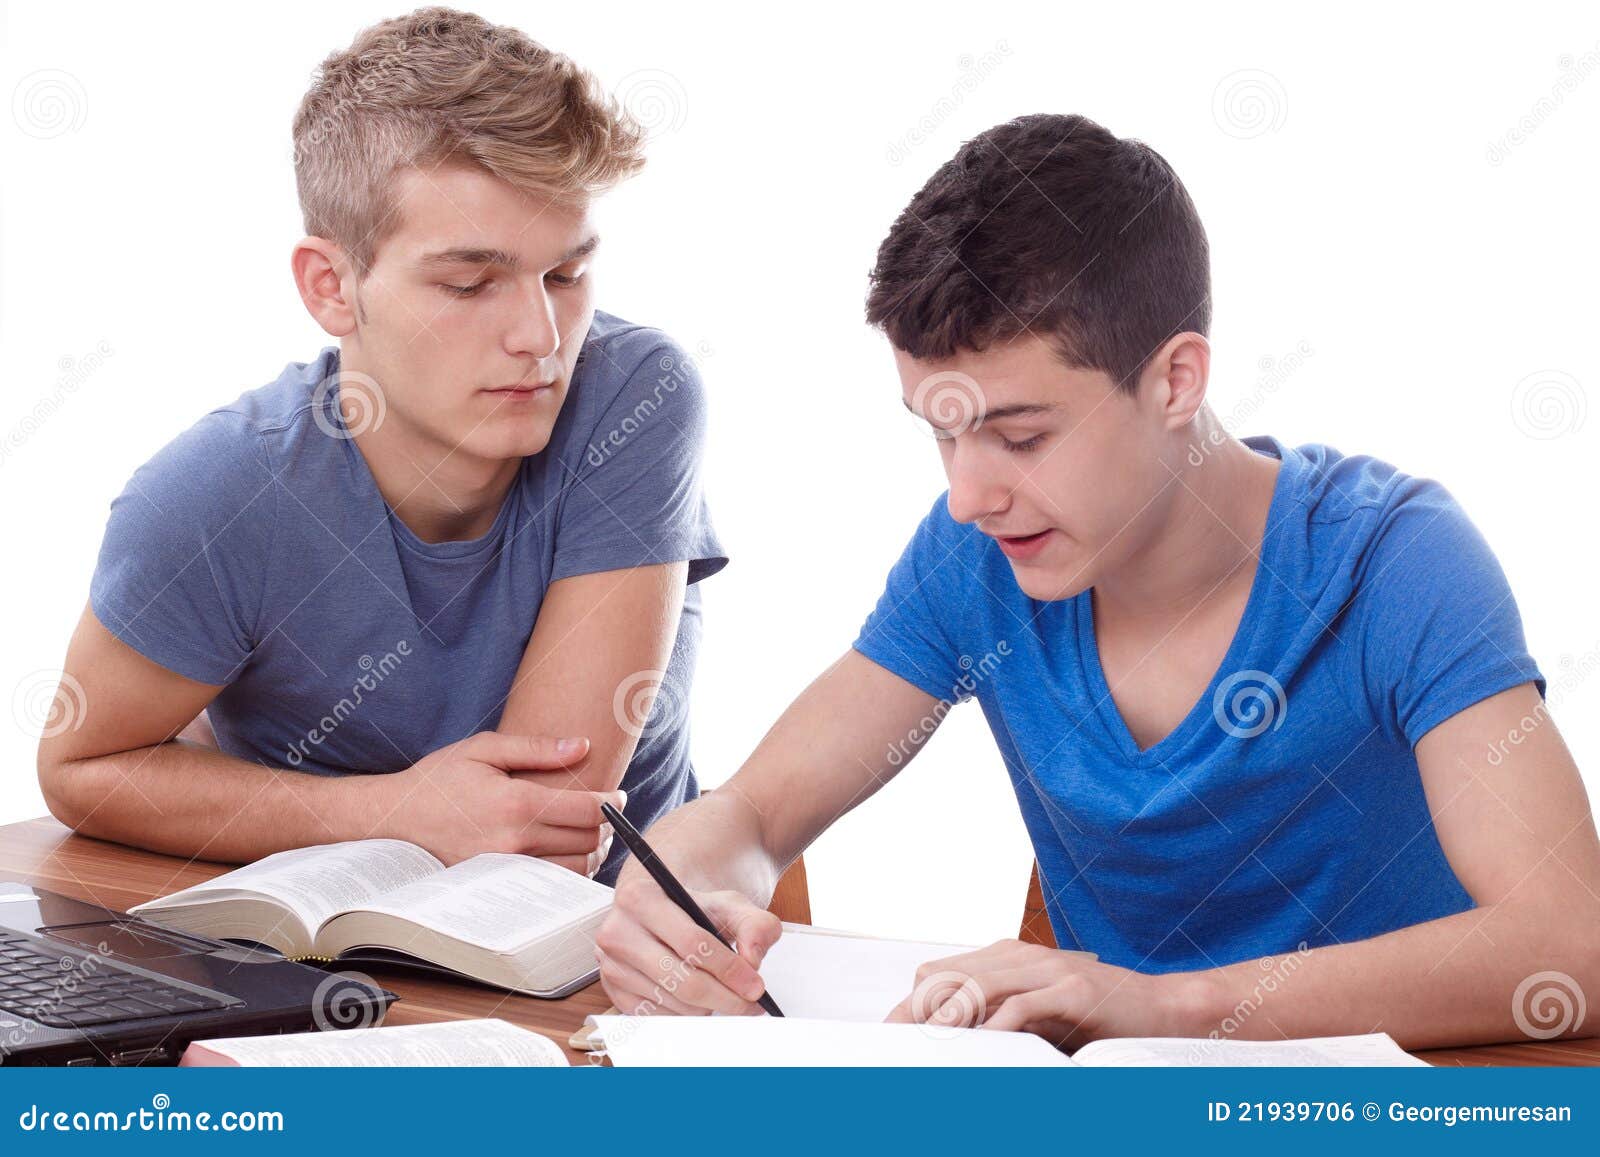 studying together